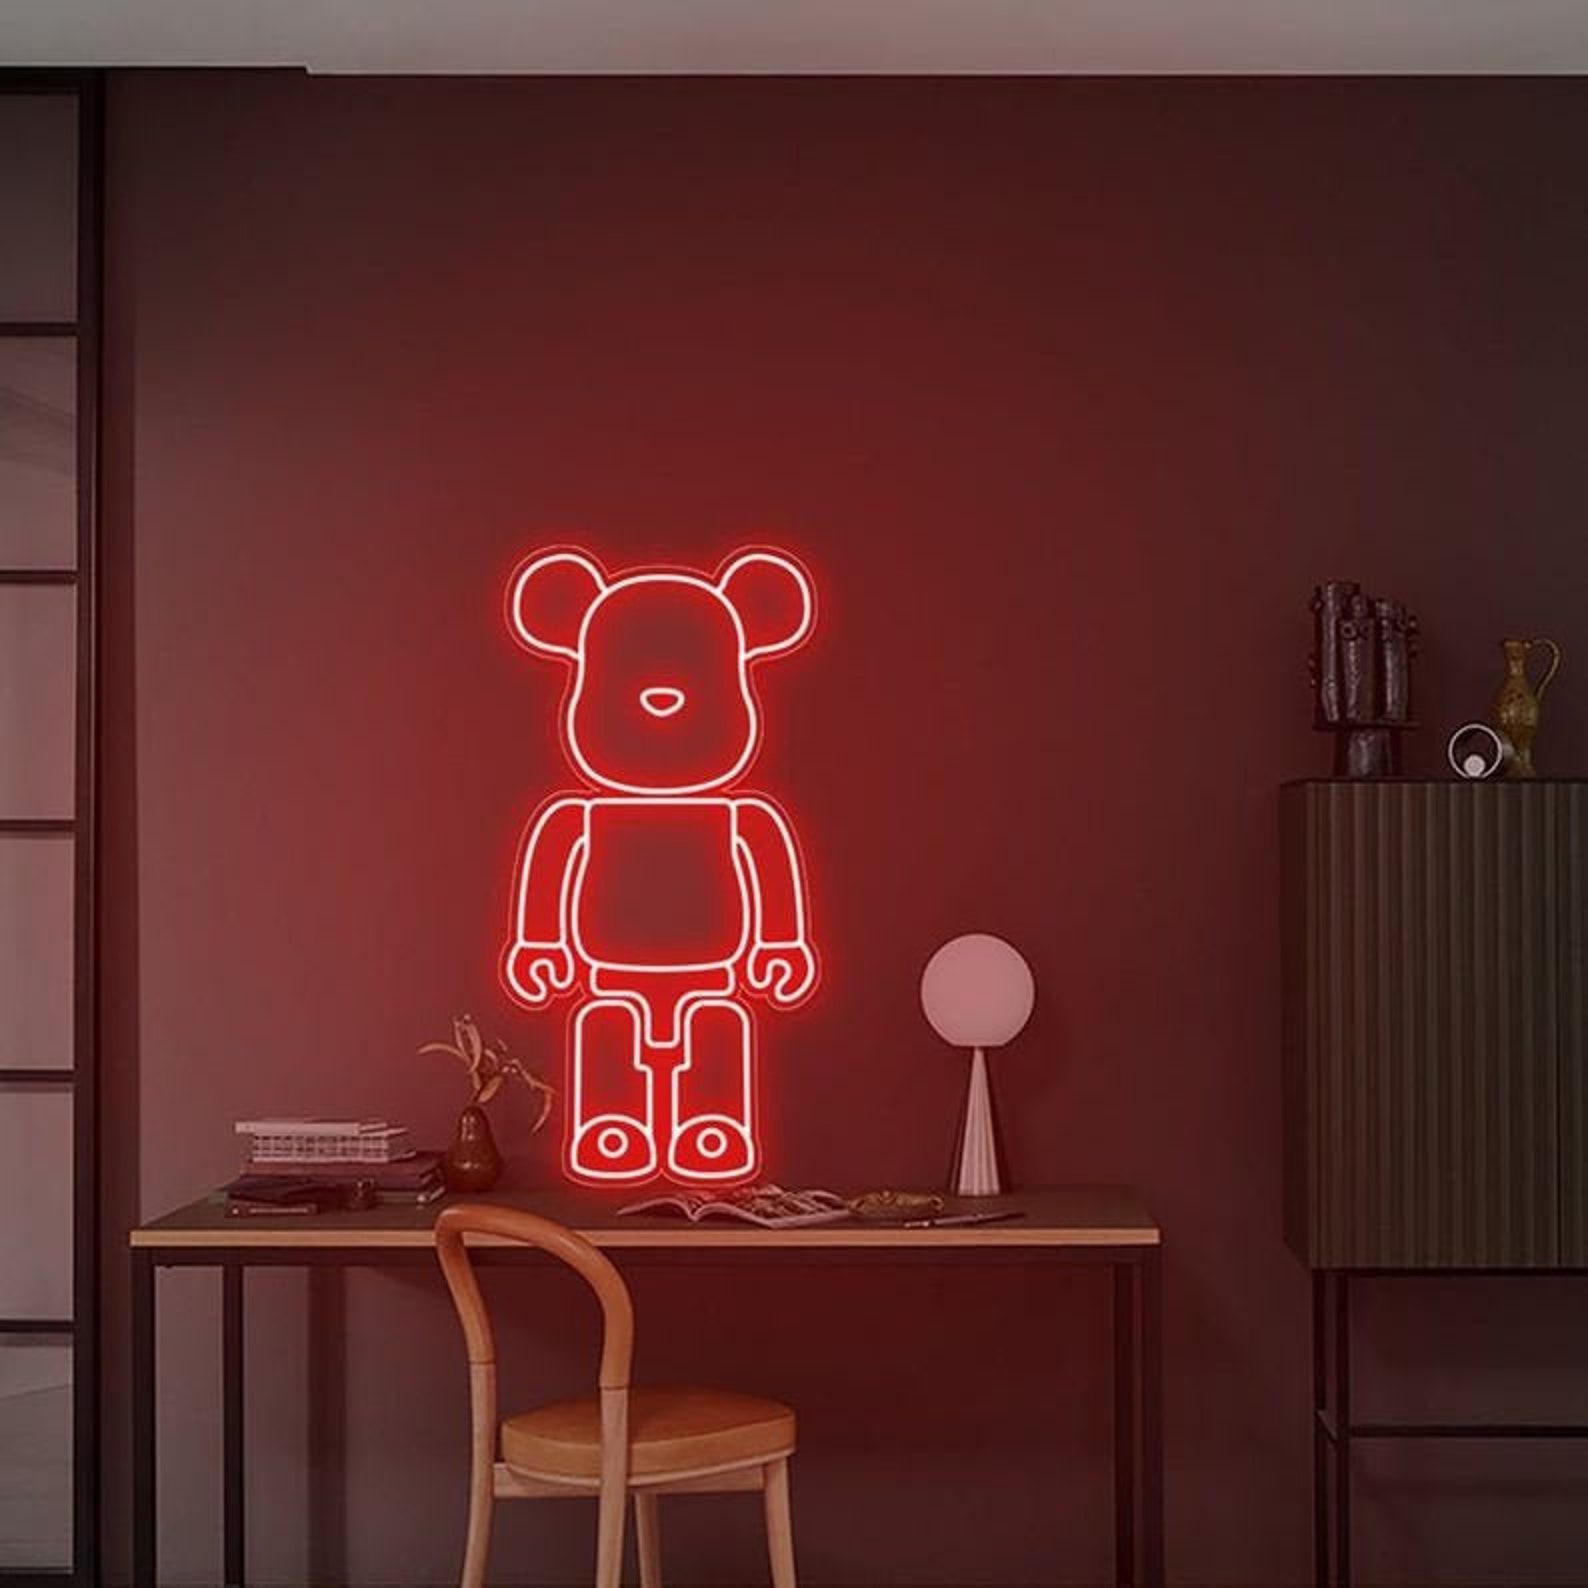 Bearbrick Neon Sign Customized Neon LED SignLight for Wall | Etsy